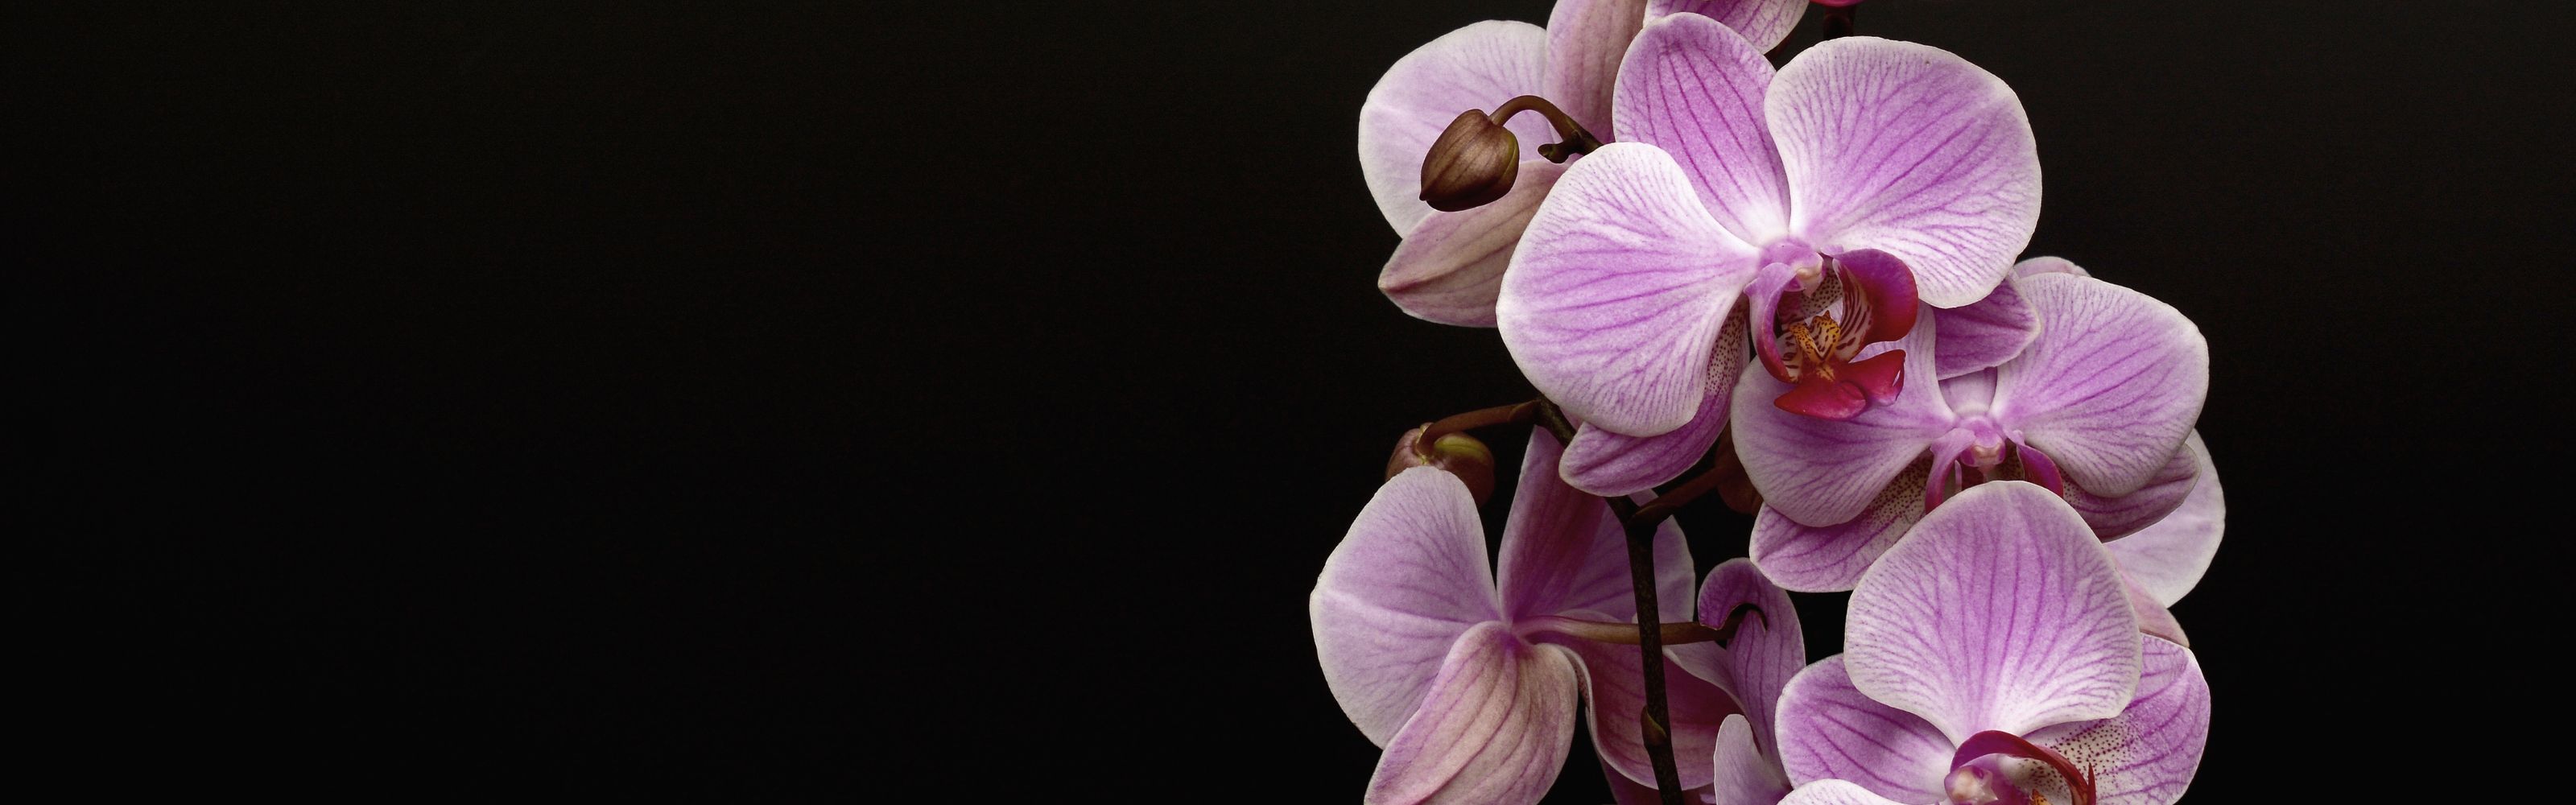 Guide - Orchids.jpg